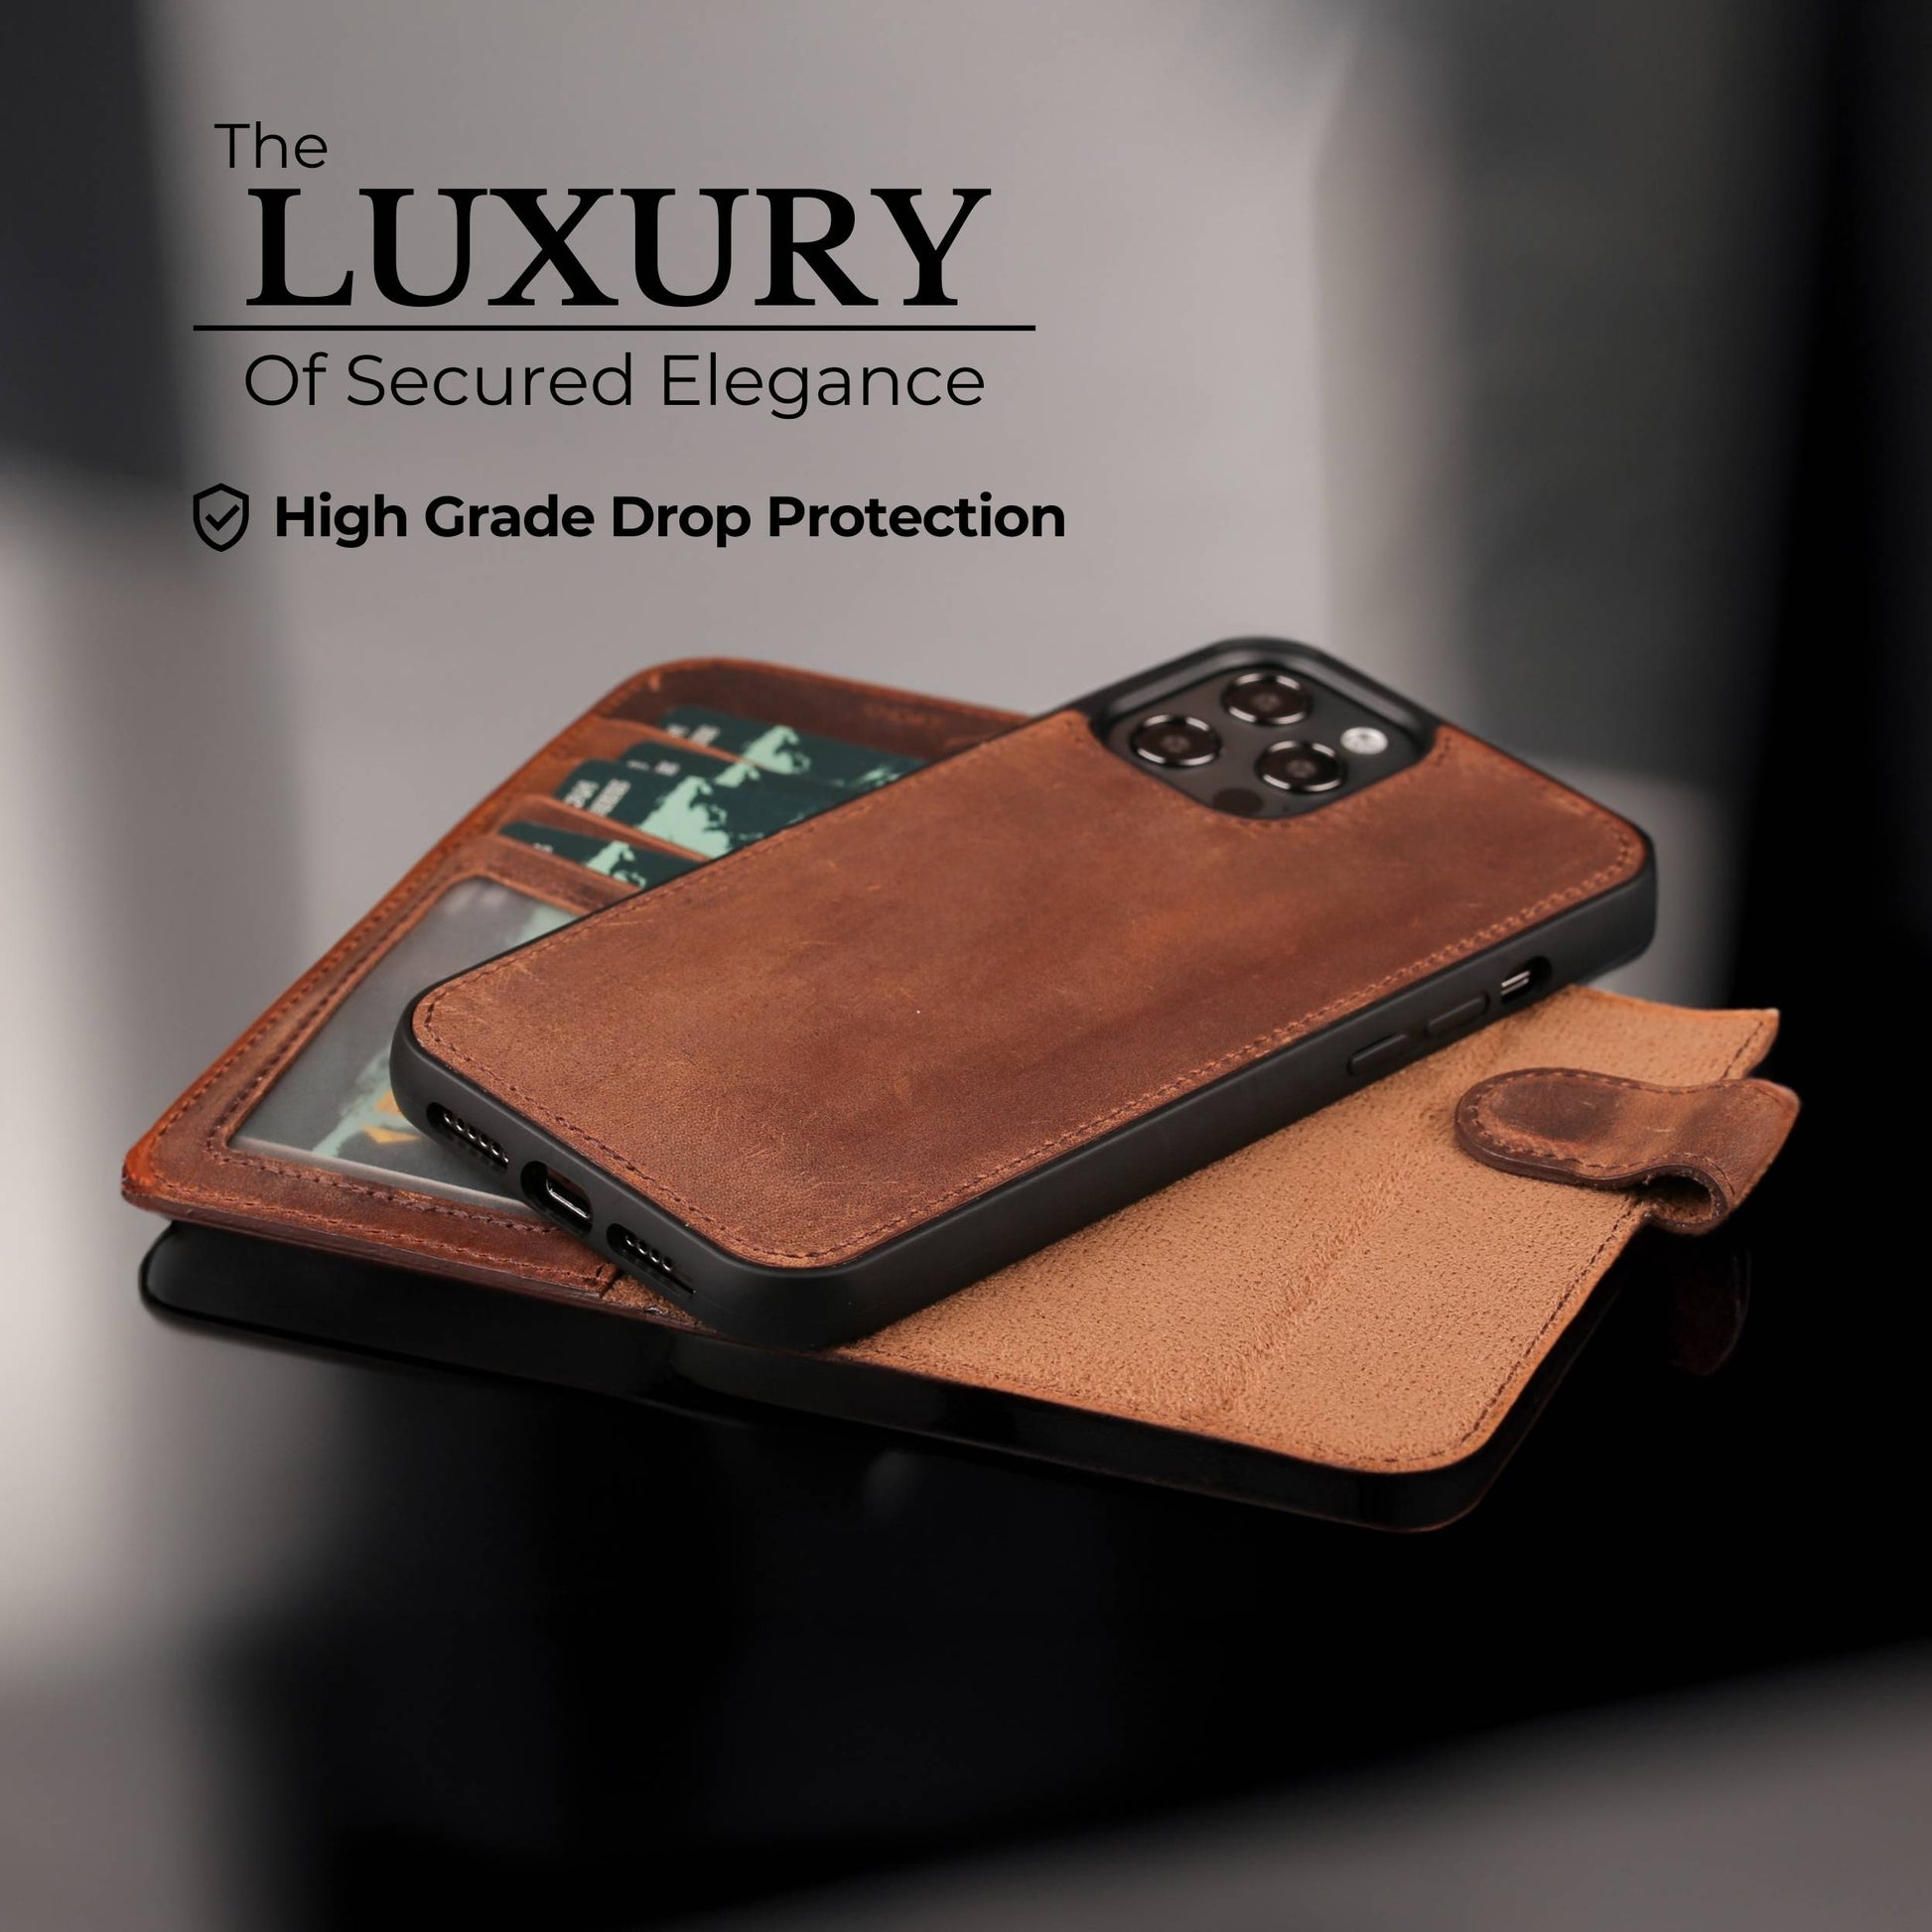 Oxa iPhone Xs Max Leather Wallet Case - Rustic